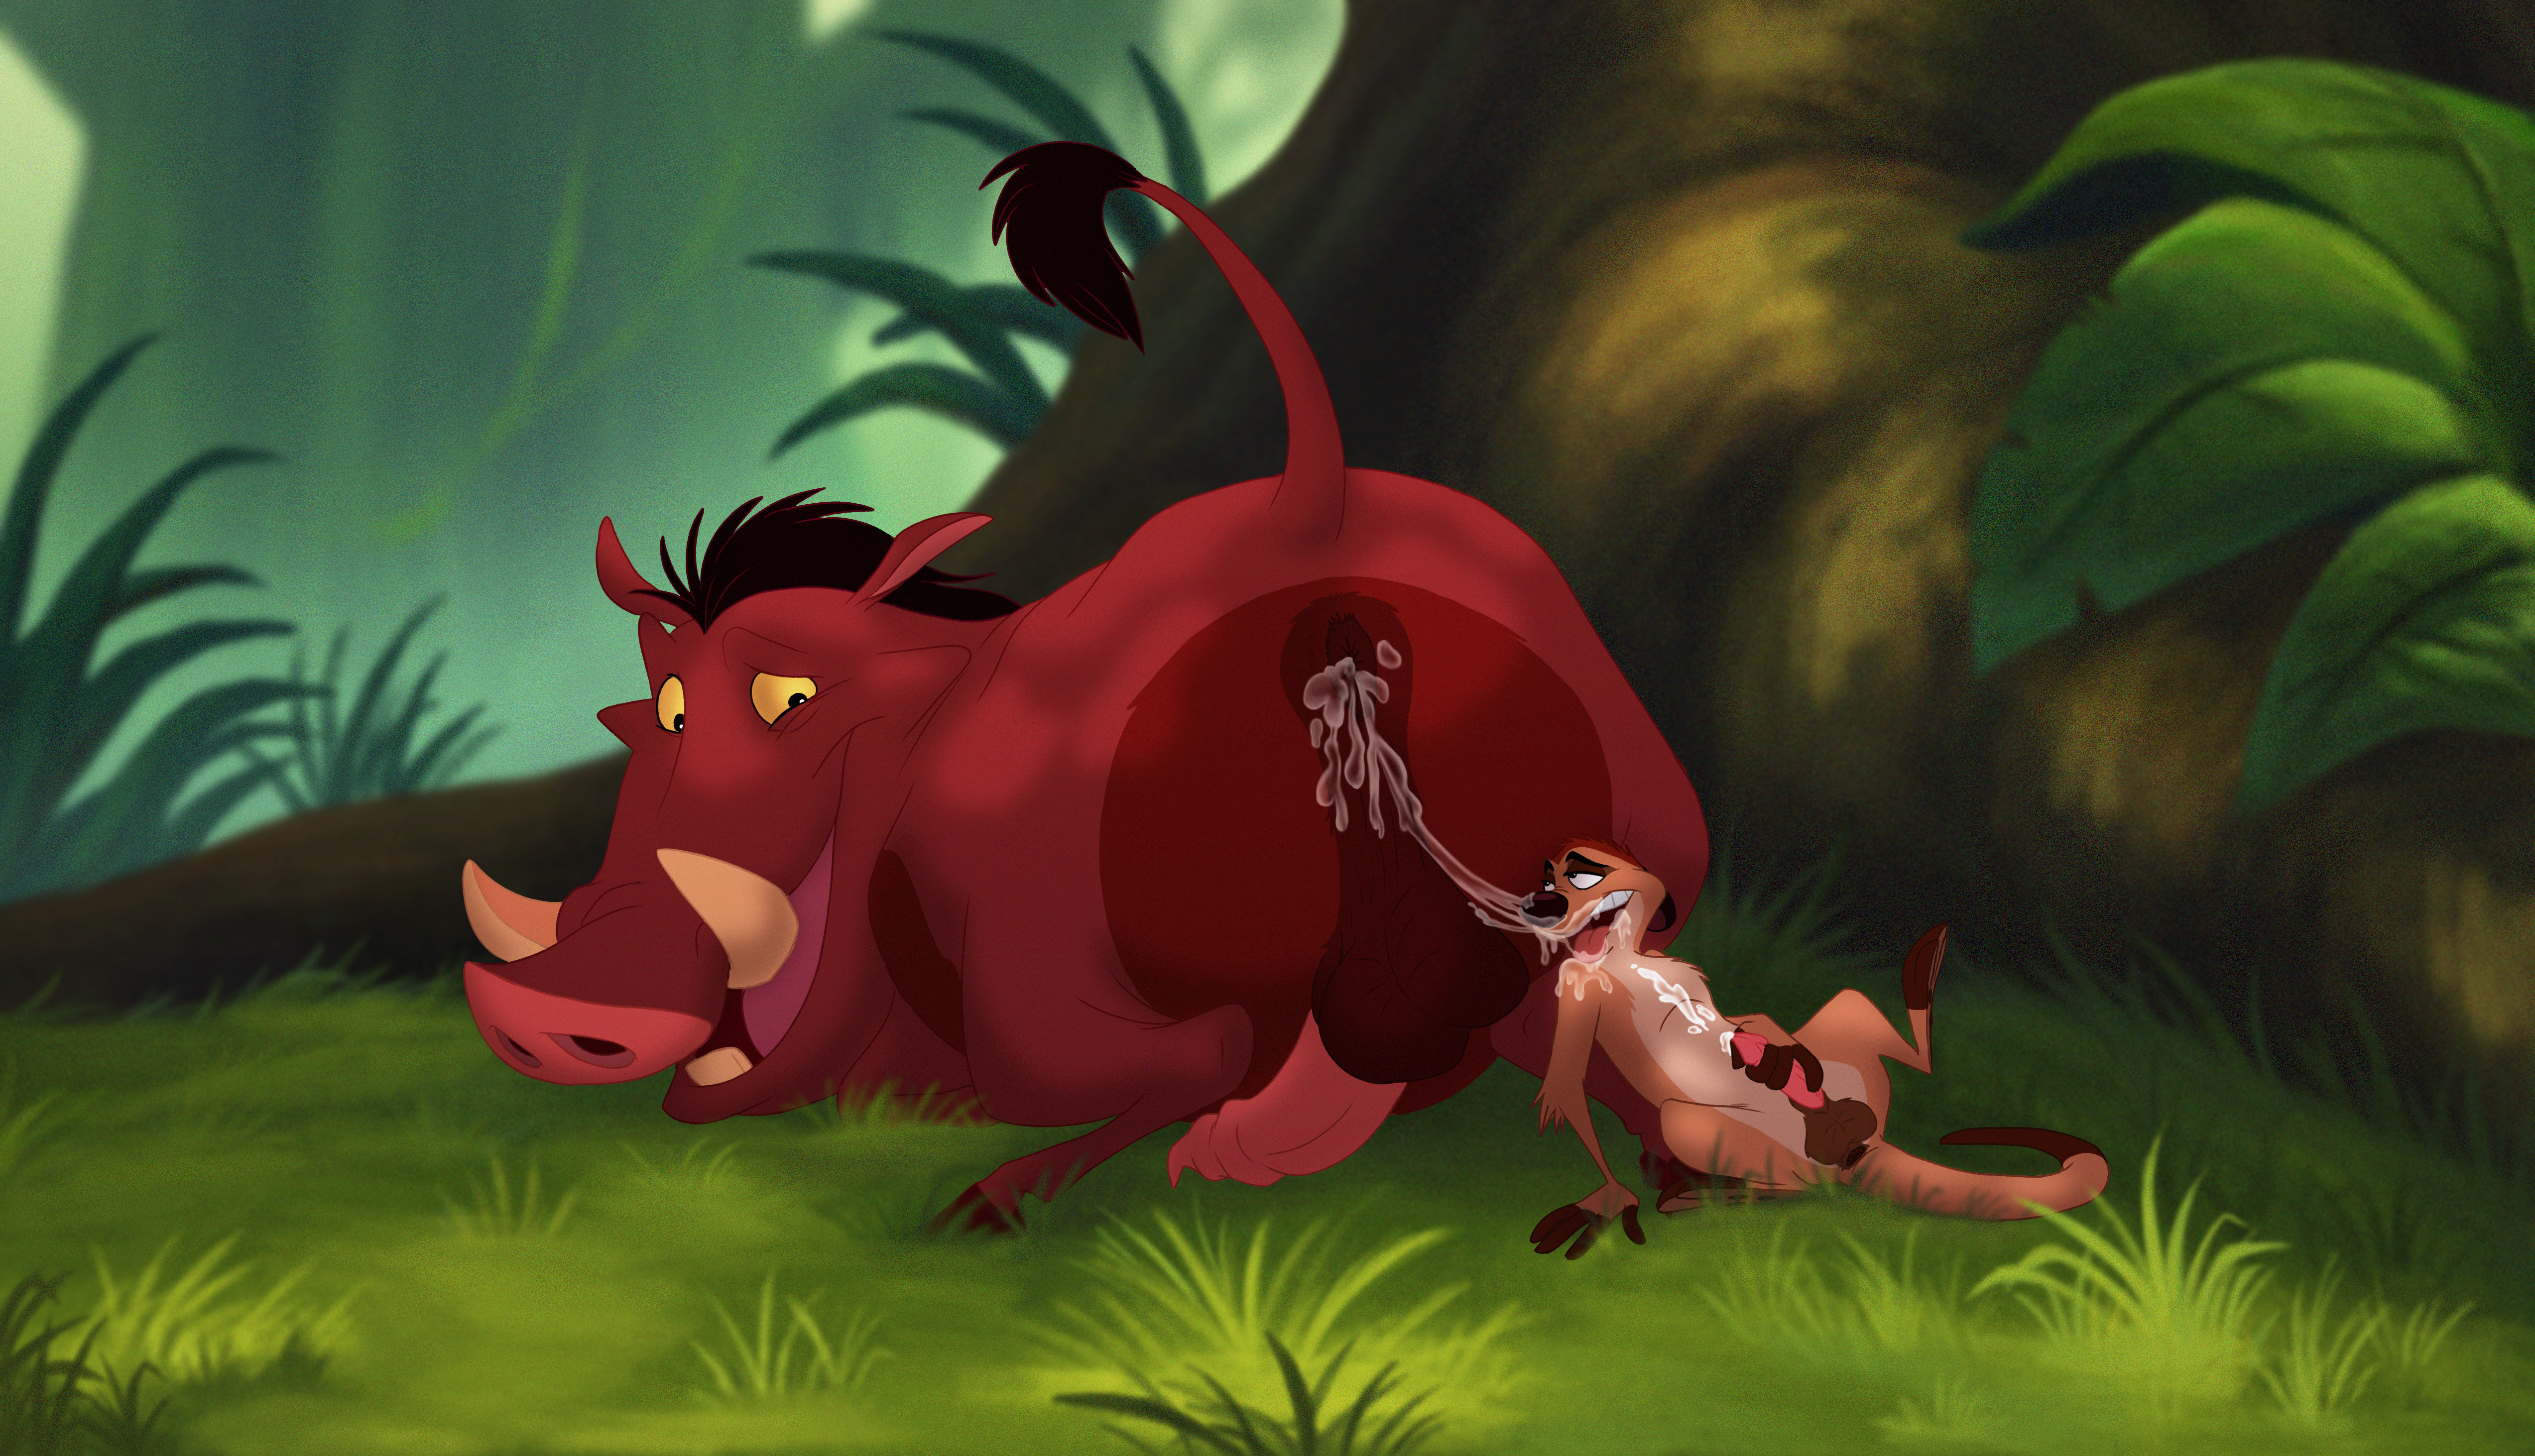 Lion king deleted scene pumbaa gets squirted by ink bug